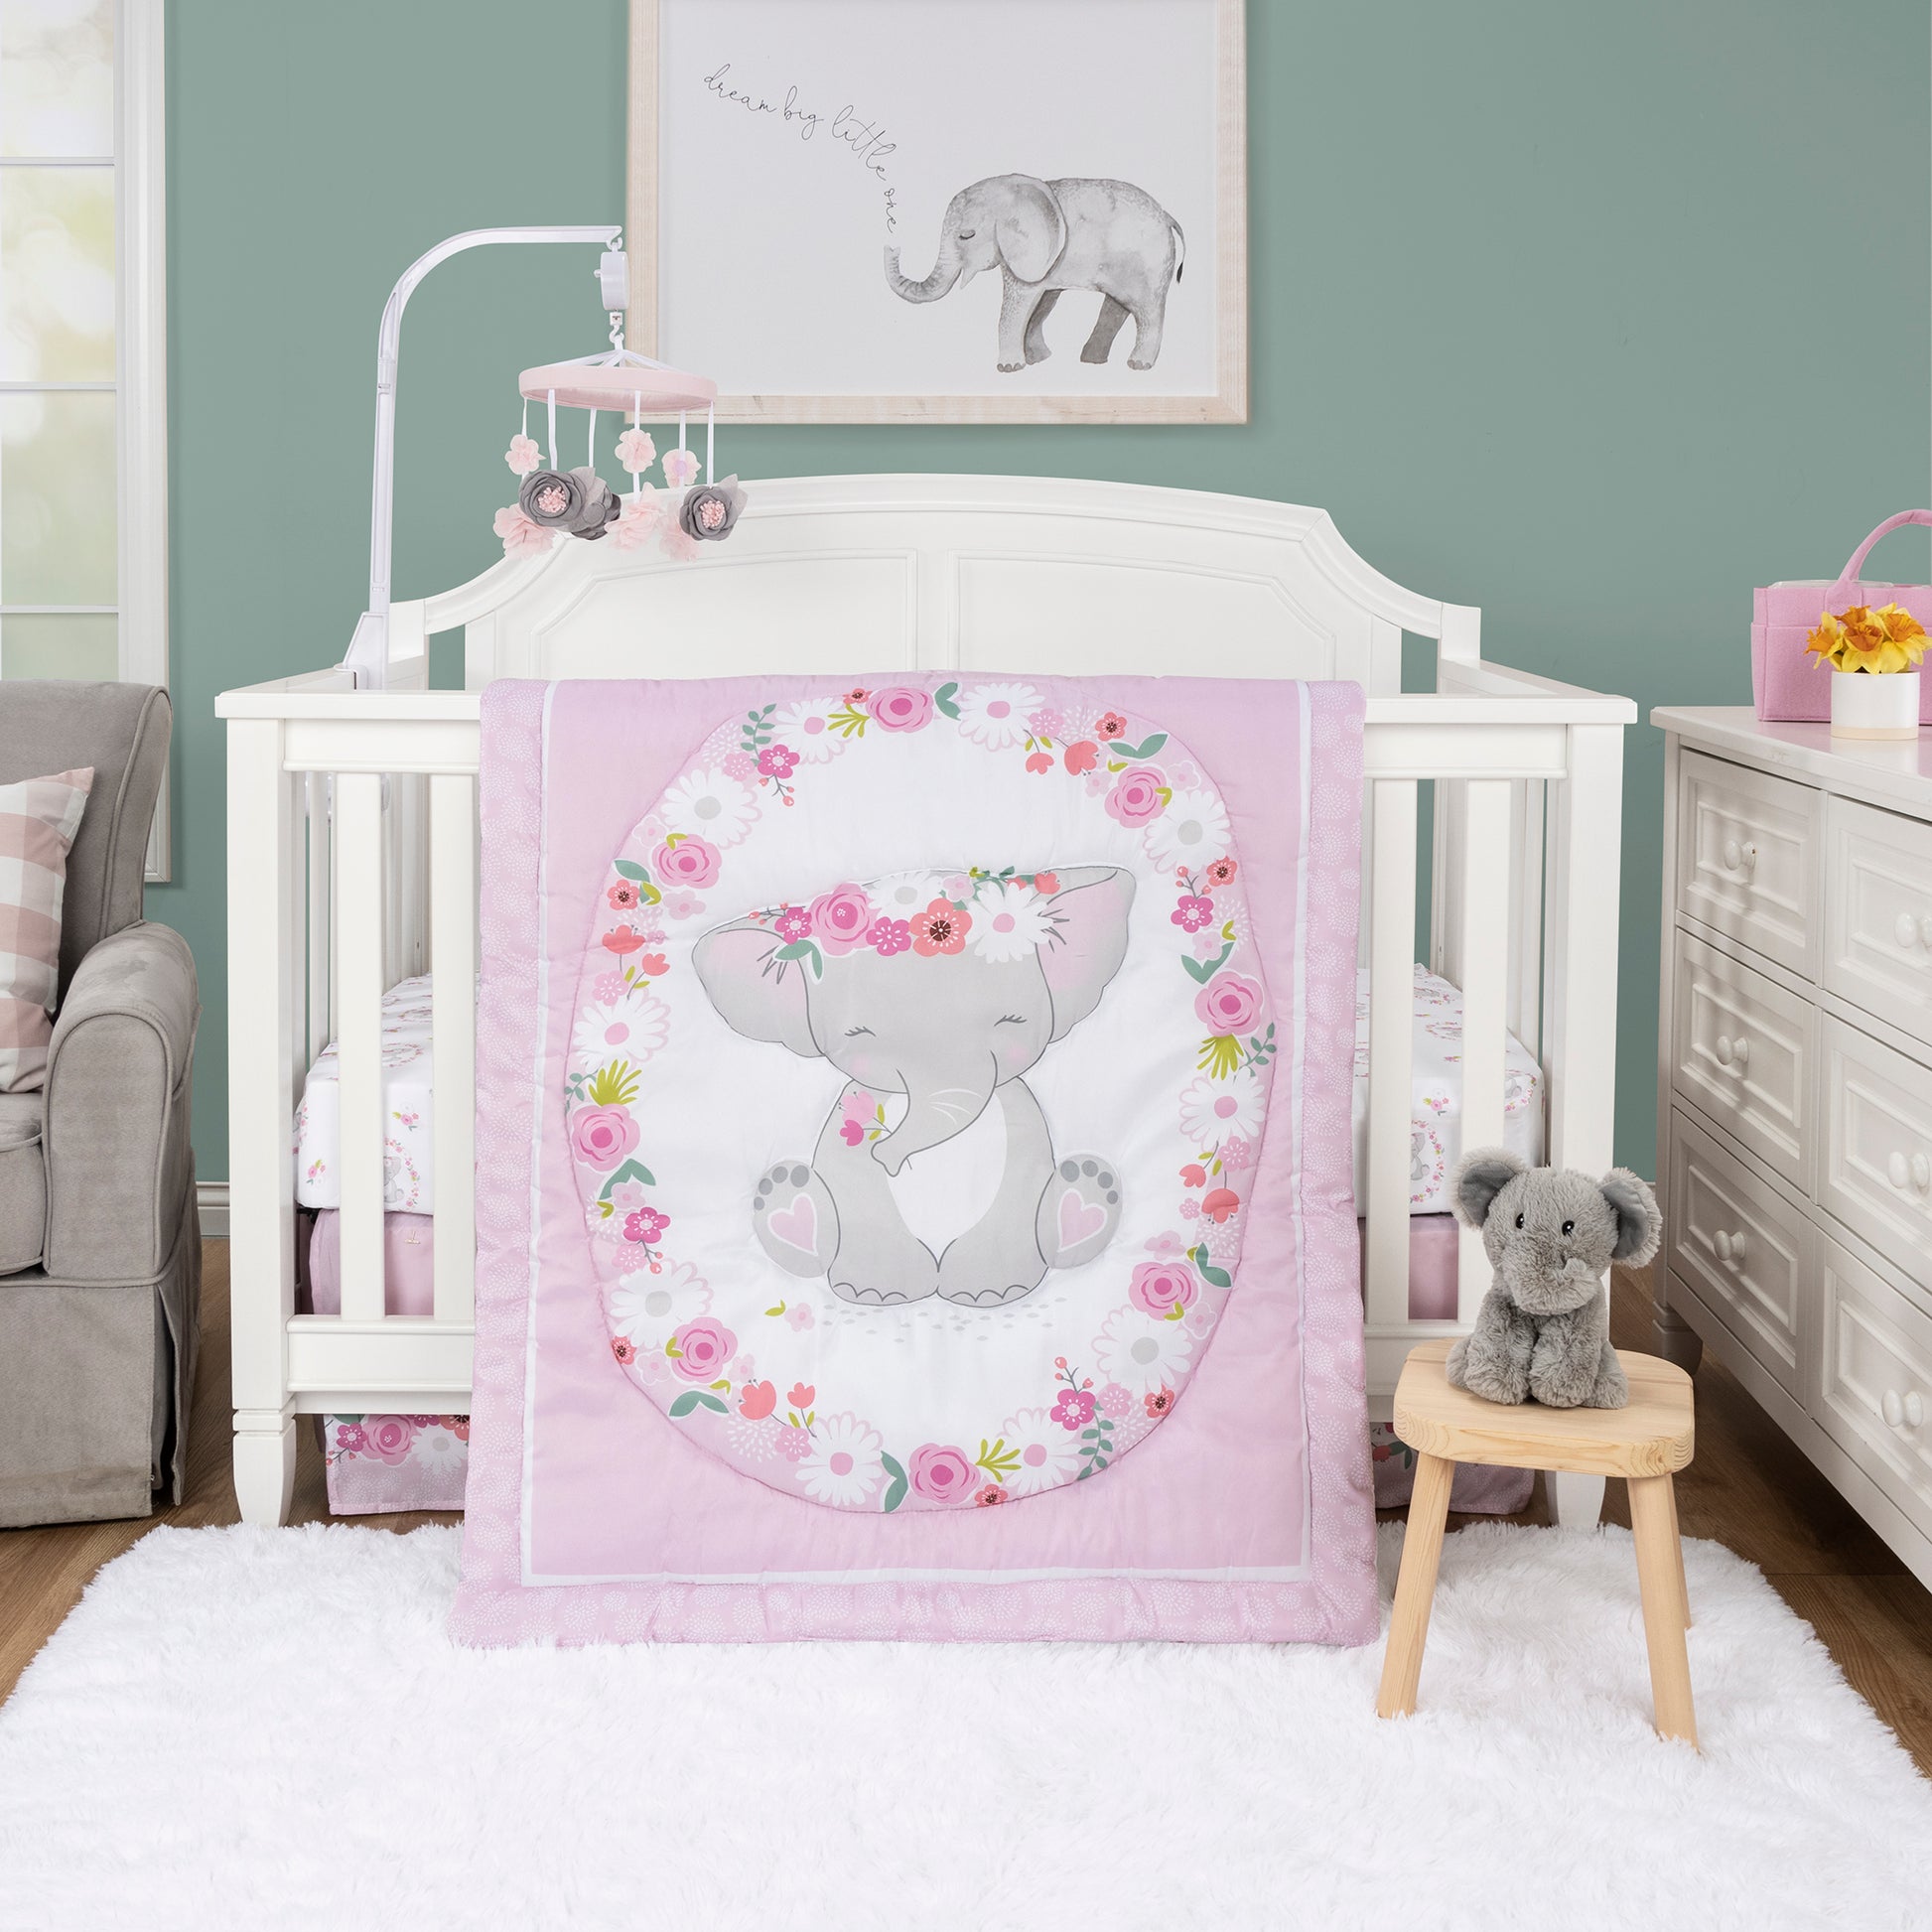 Elephant Garden 4 Piece Crib Bedding Set by Sammy & Lou® in stylized bedroom. Set includes a nursery quilt / playmat, fitted crib sheet, crib skirt, and elephant plush toy.